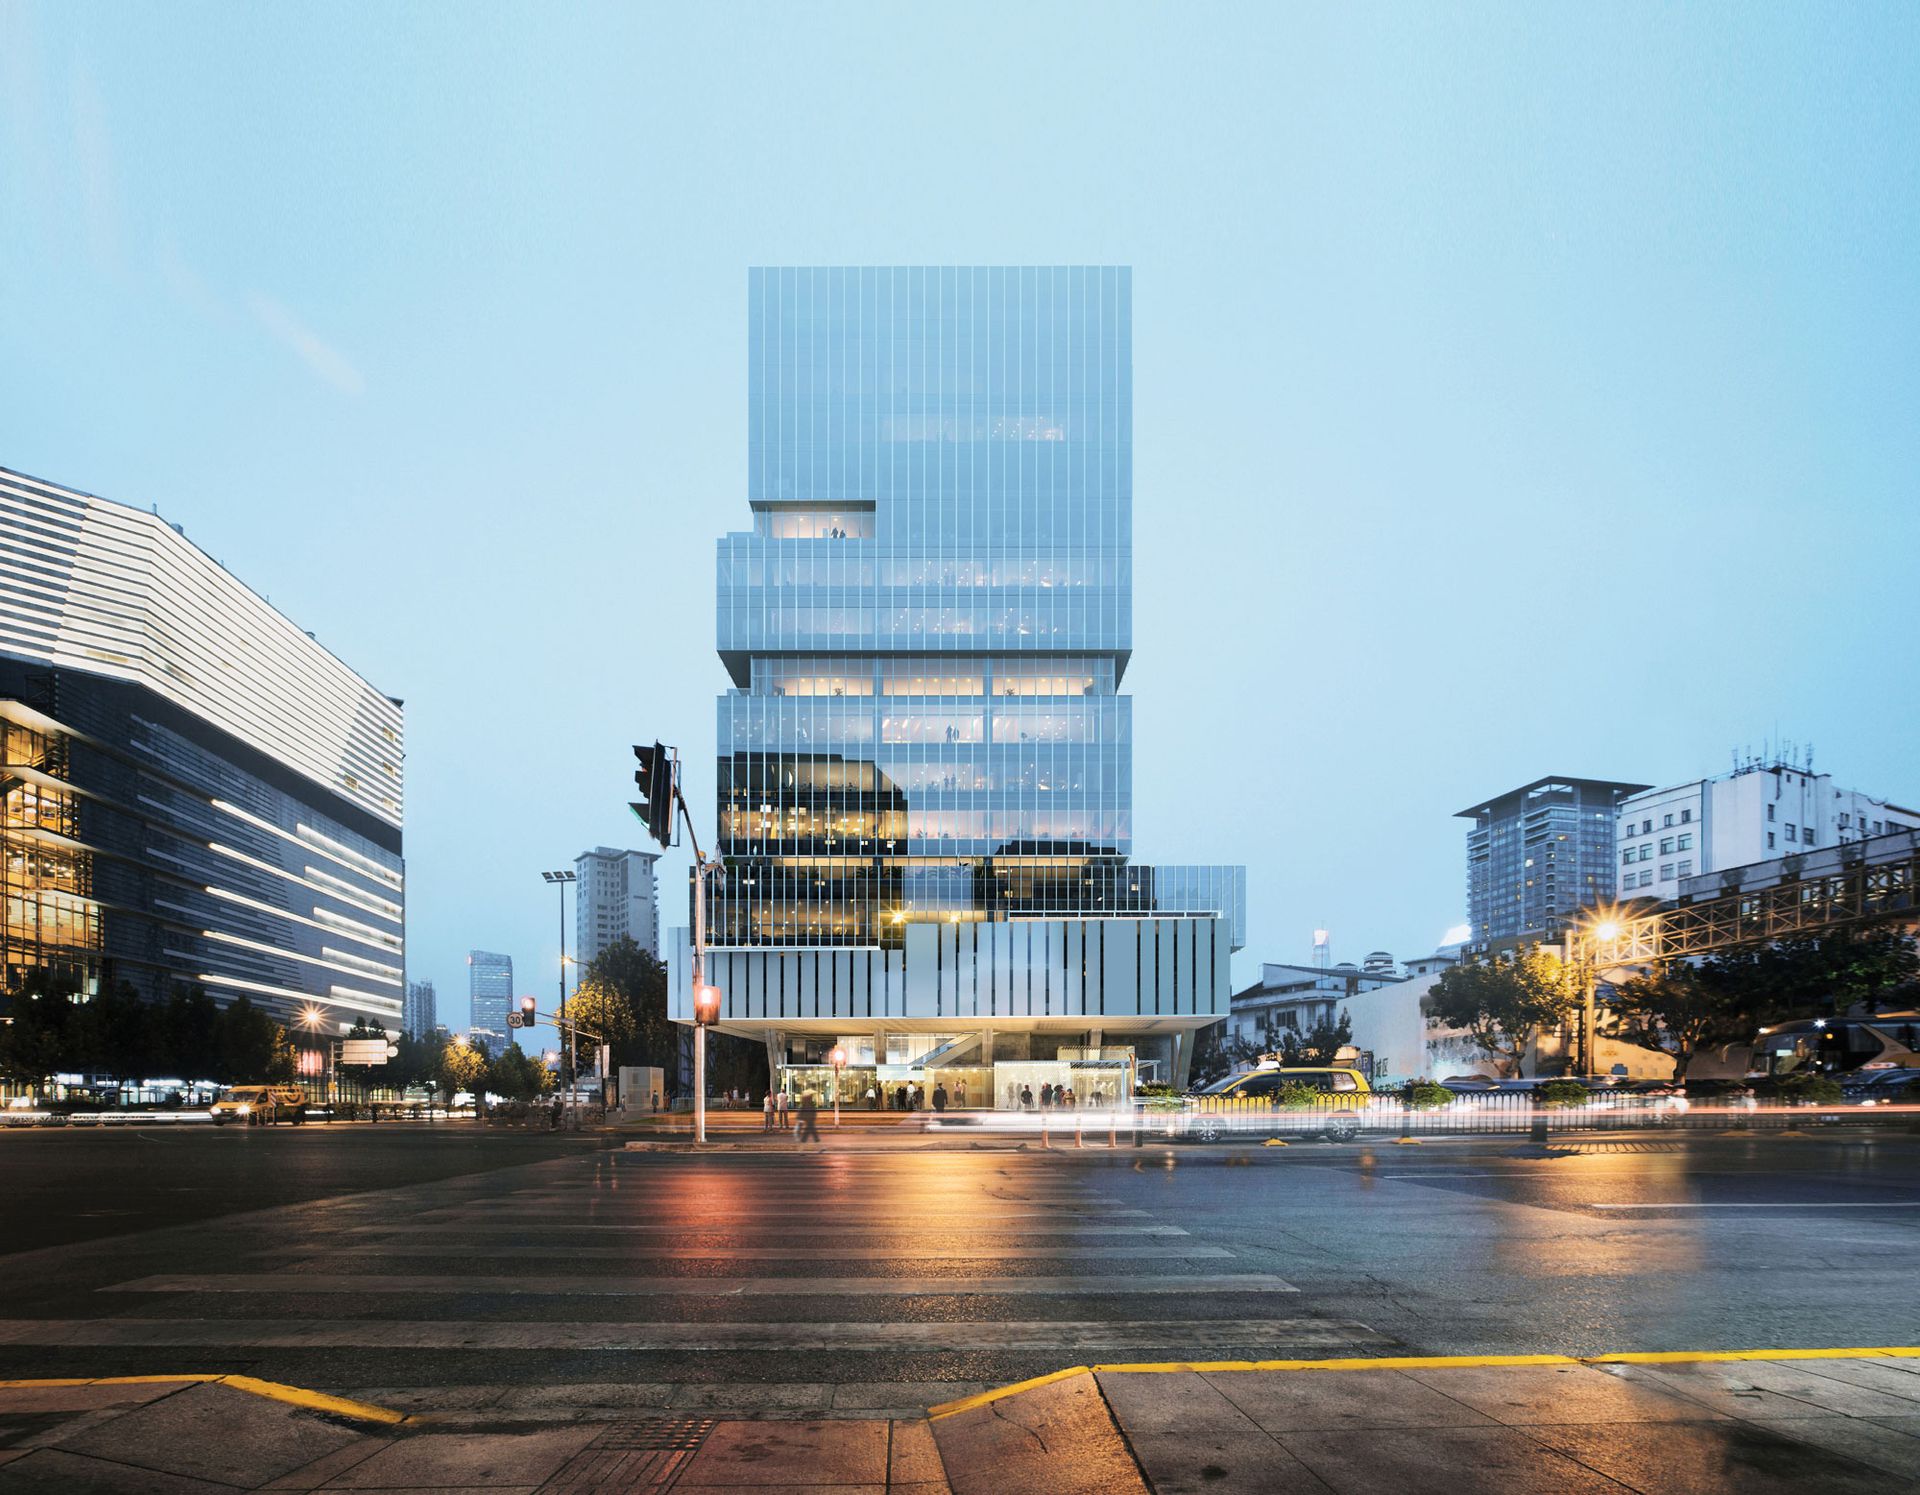 UCCA Edge, Shanghai's new branch of the Beijing flagship contemporary art centre, occupies three floors of a new office tower designed by the architects SO – IL Photo: Courtesy of K. Wah Group